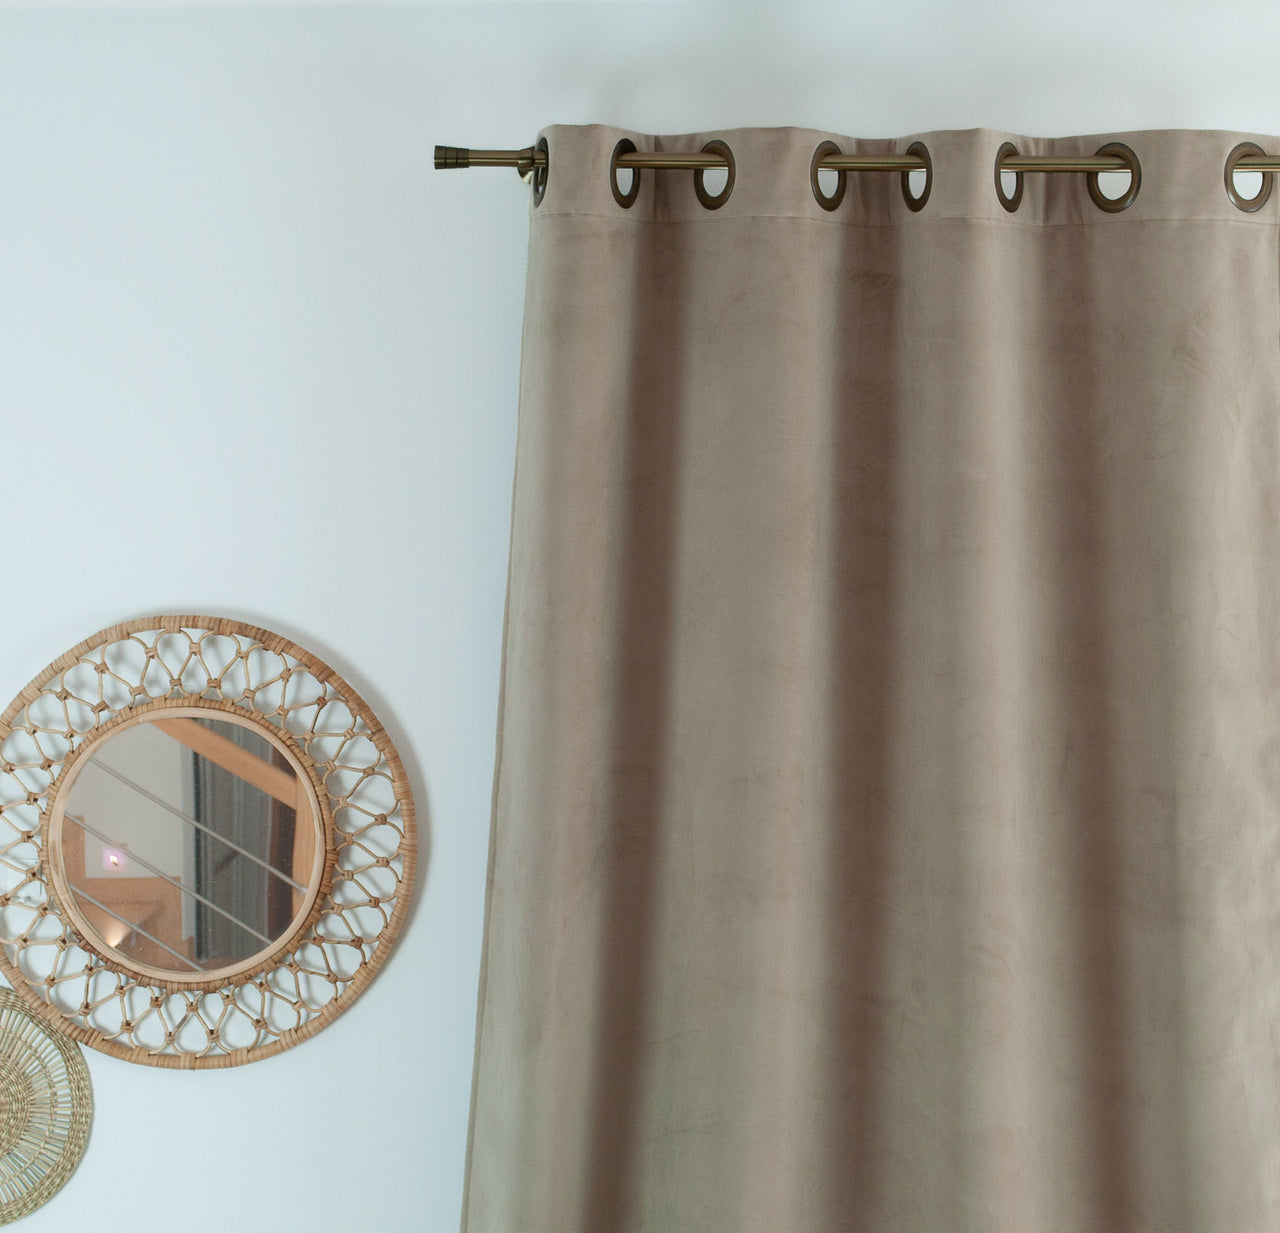 Thermal Curtains With Eyelets, Rod Pocket, Back Tabs and Tape For Rings and Hooks